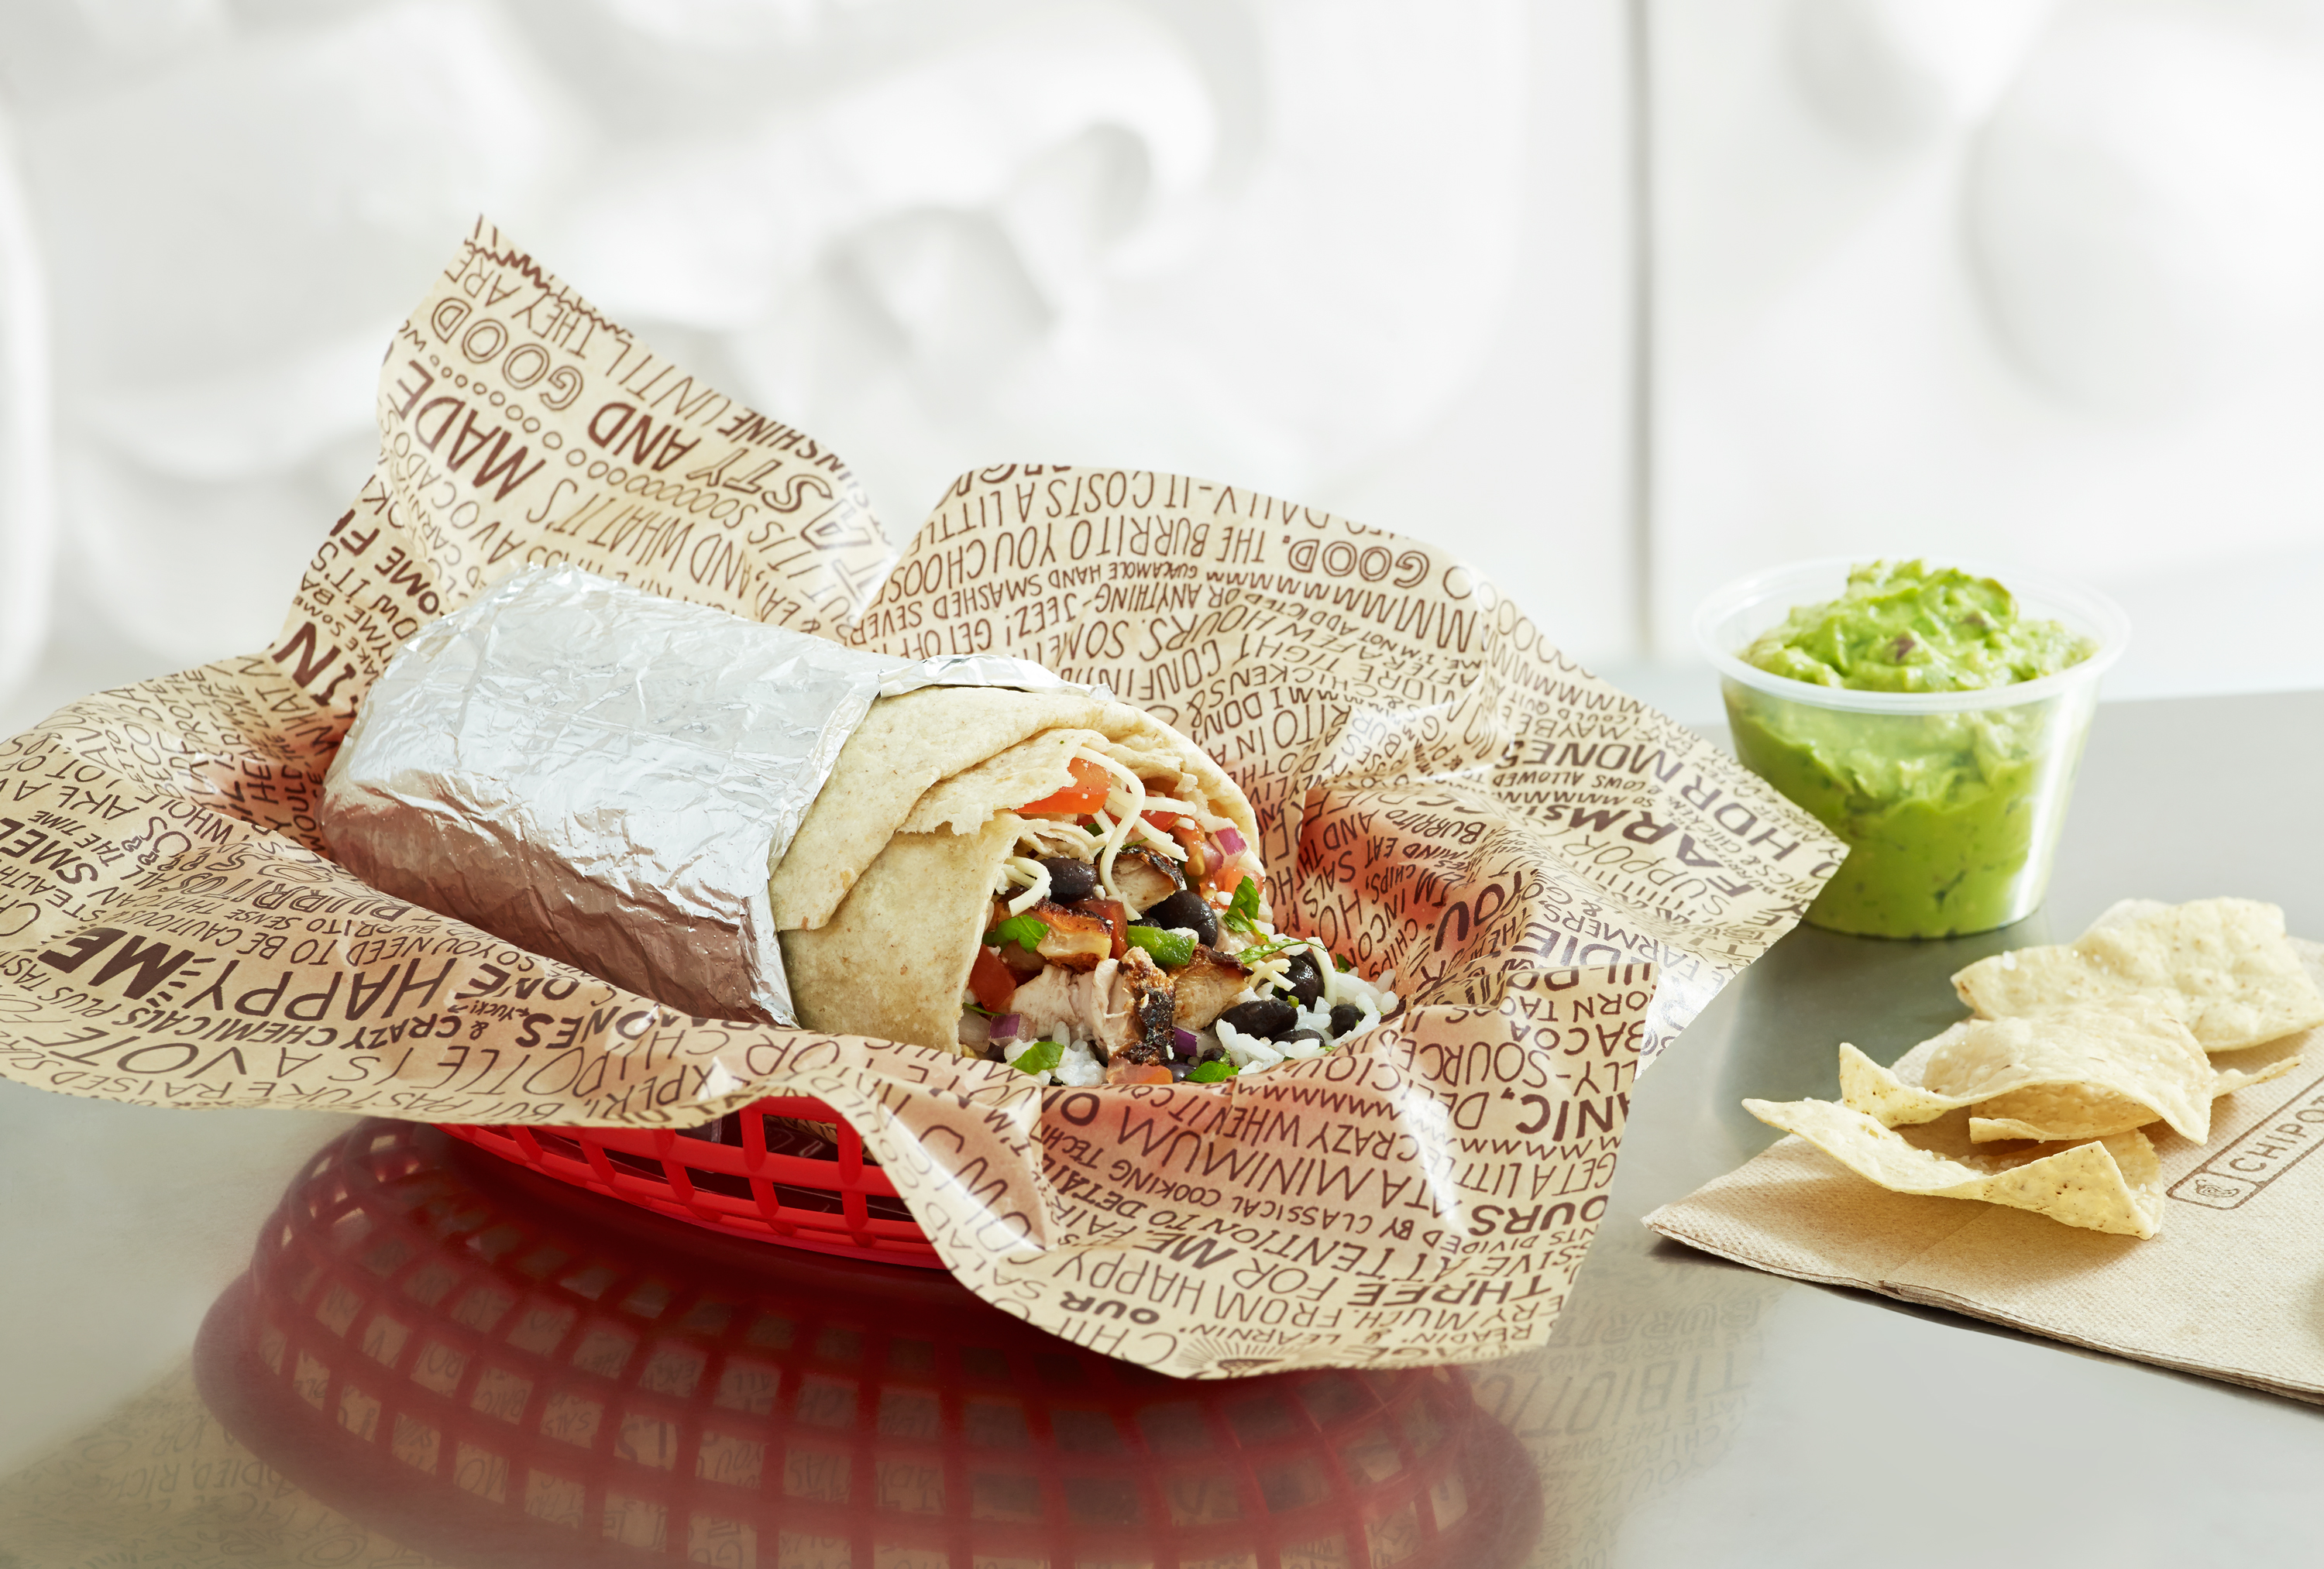 Chipotle BOGO Coupon How to Get Free Burritos This Week Money